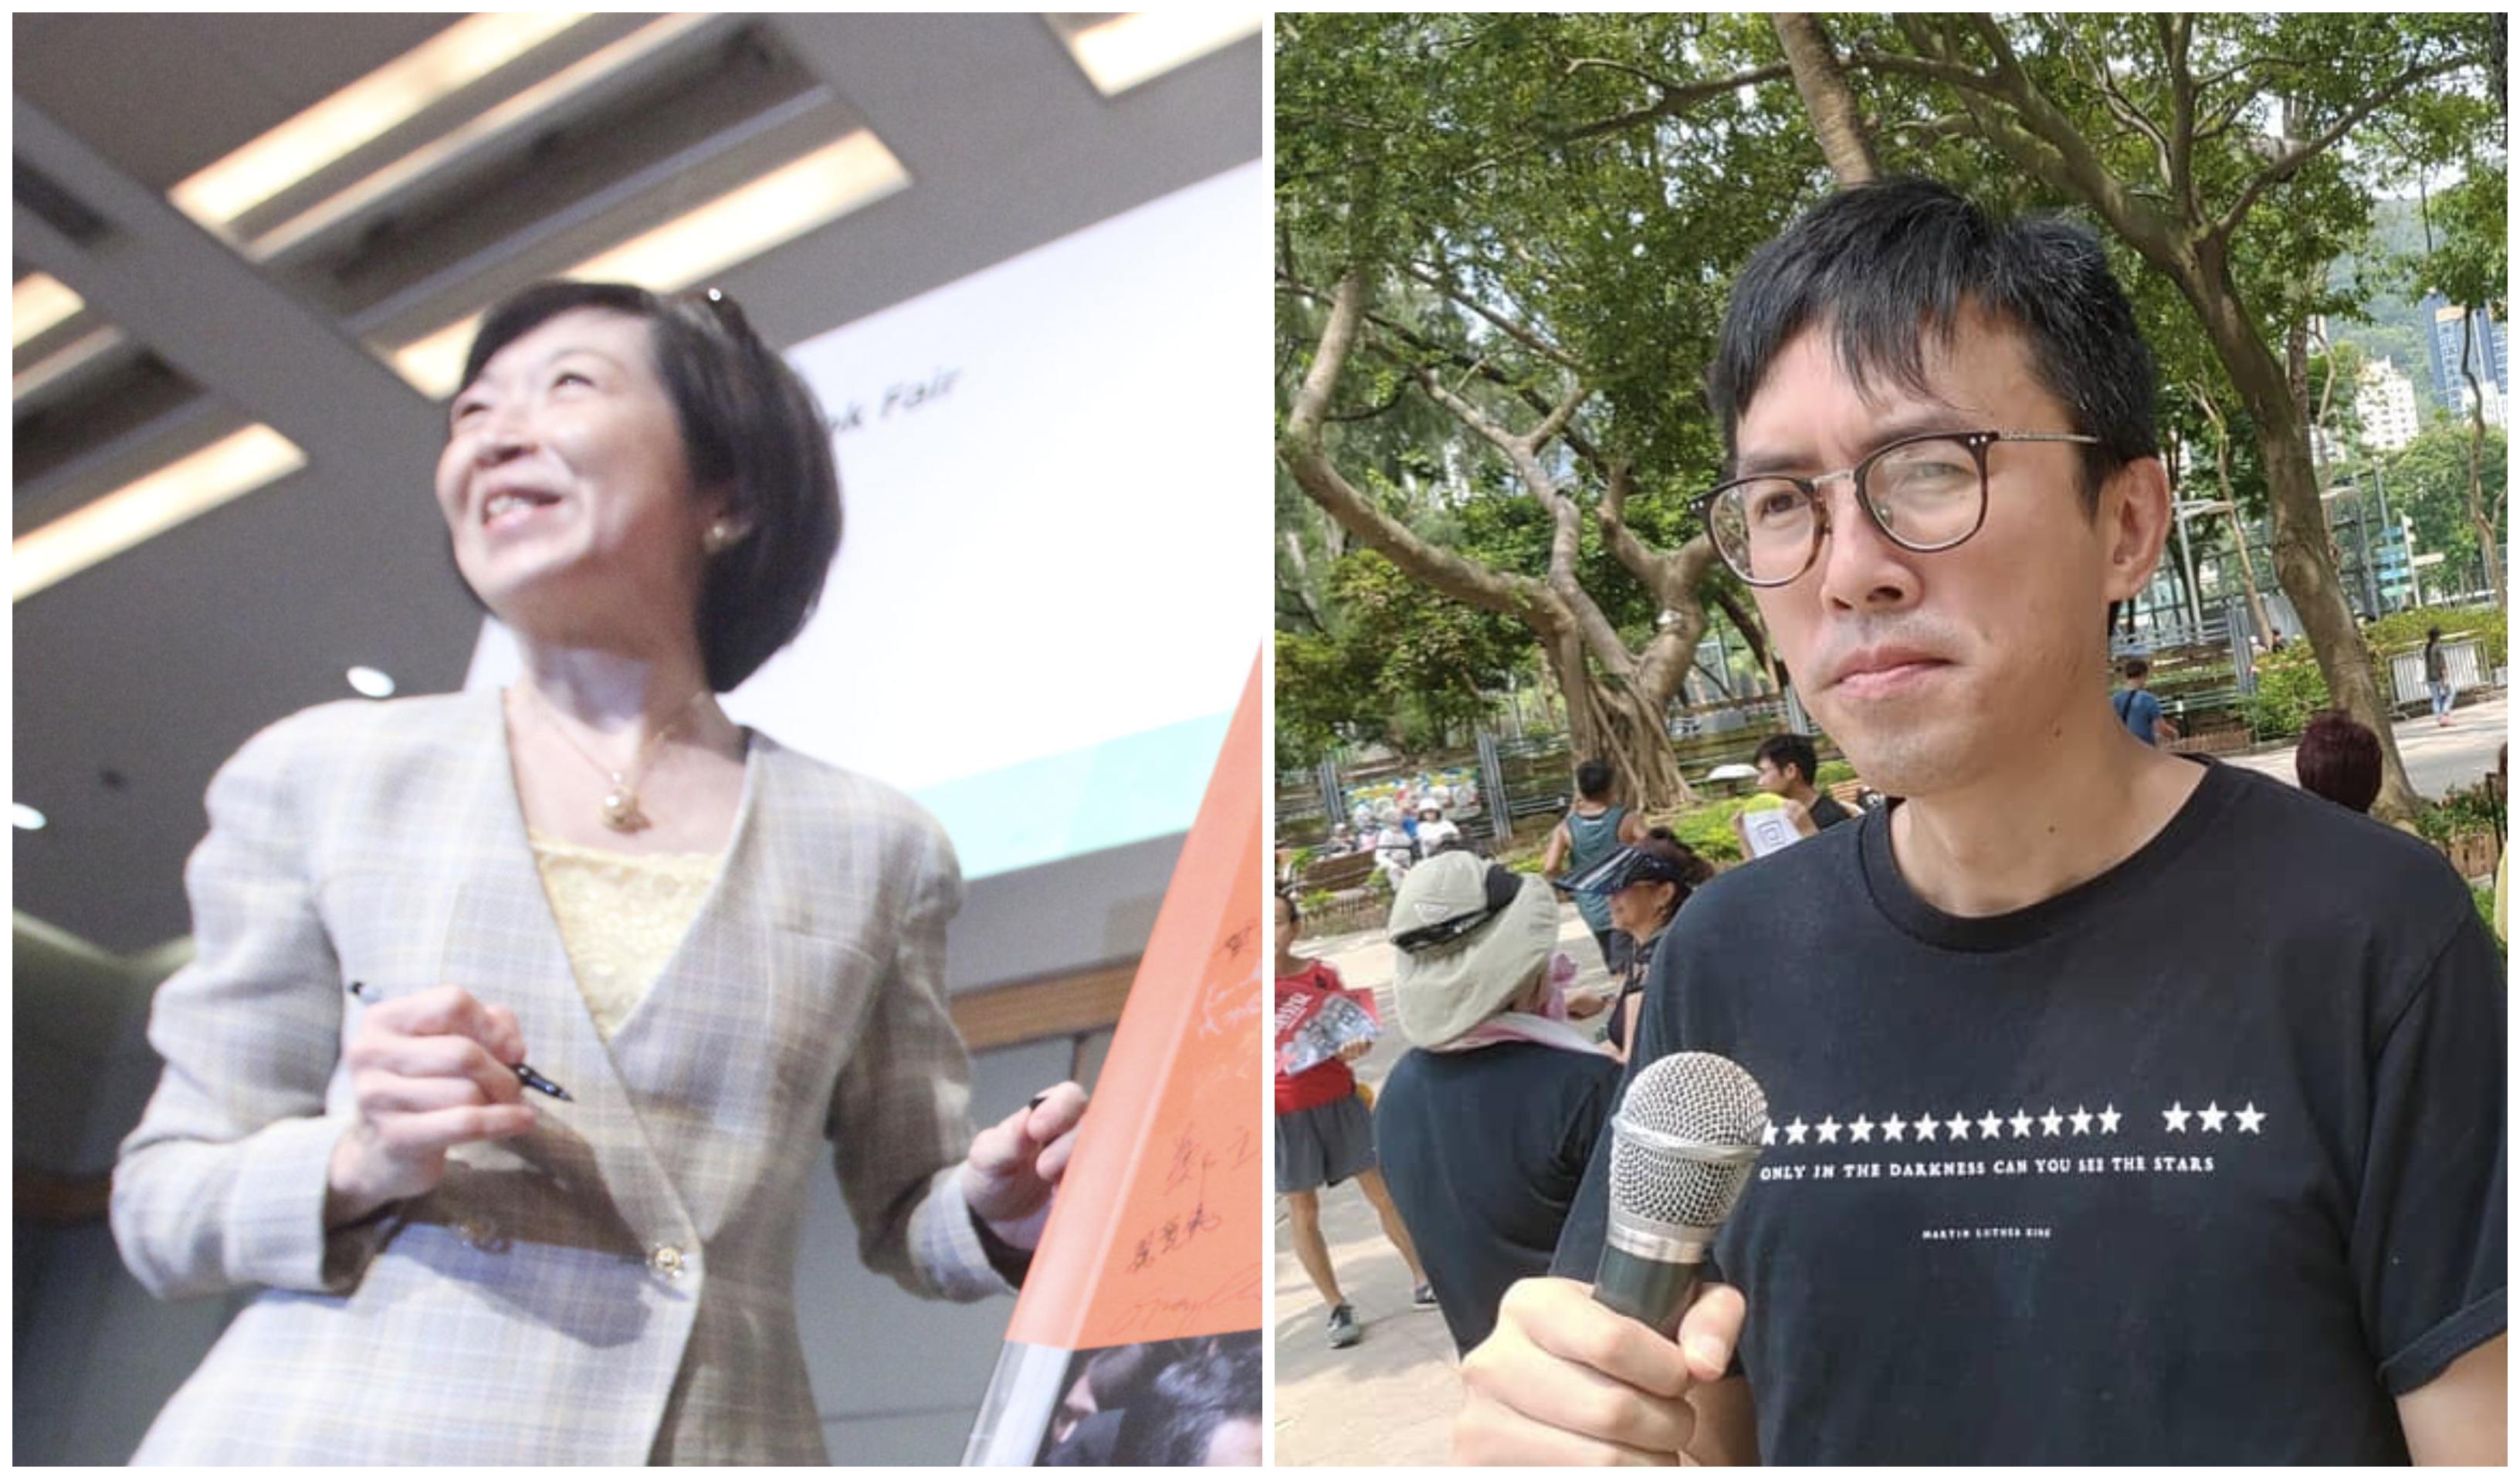 Executive Council member Fanny Law (left) and pro-dem Avery Ng (right) sparred on RTHK today over Law’s endorsement of rumors that protesters had “misled” young girls into be “comfort women” for frontline protesters. Photos via Eyemagine Asia/Facebook.